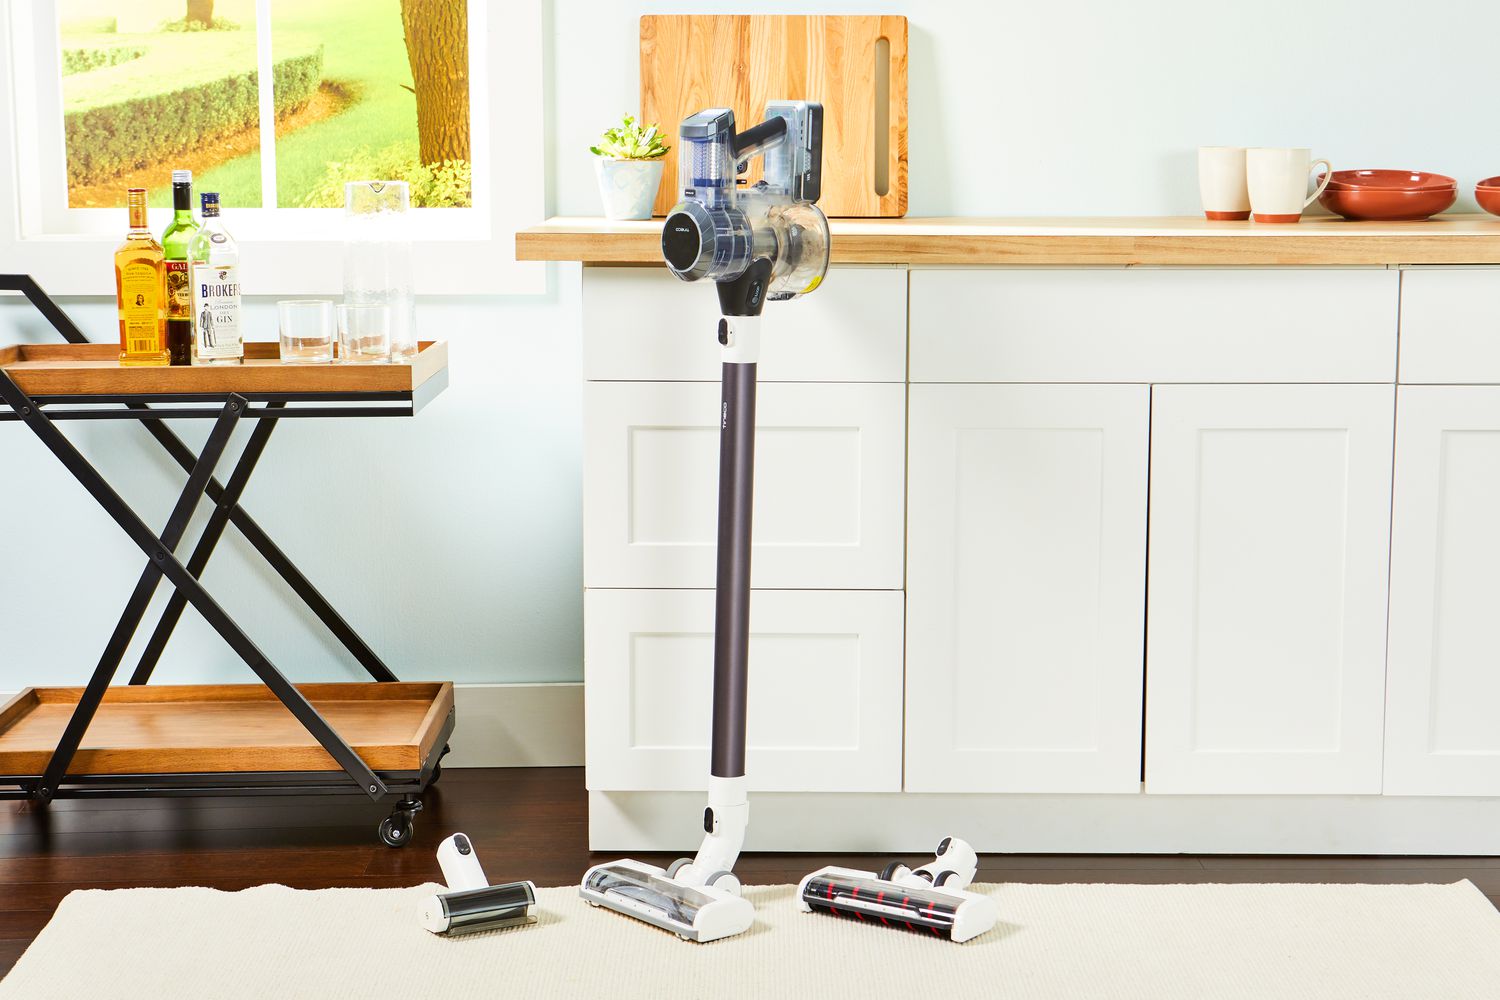 Tineco Pure One S11 Smart Stick/Handheld Vacuum standing next to white countertop and wood standing table